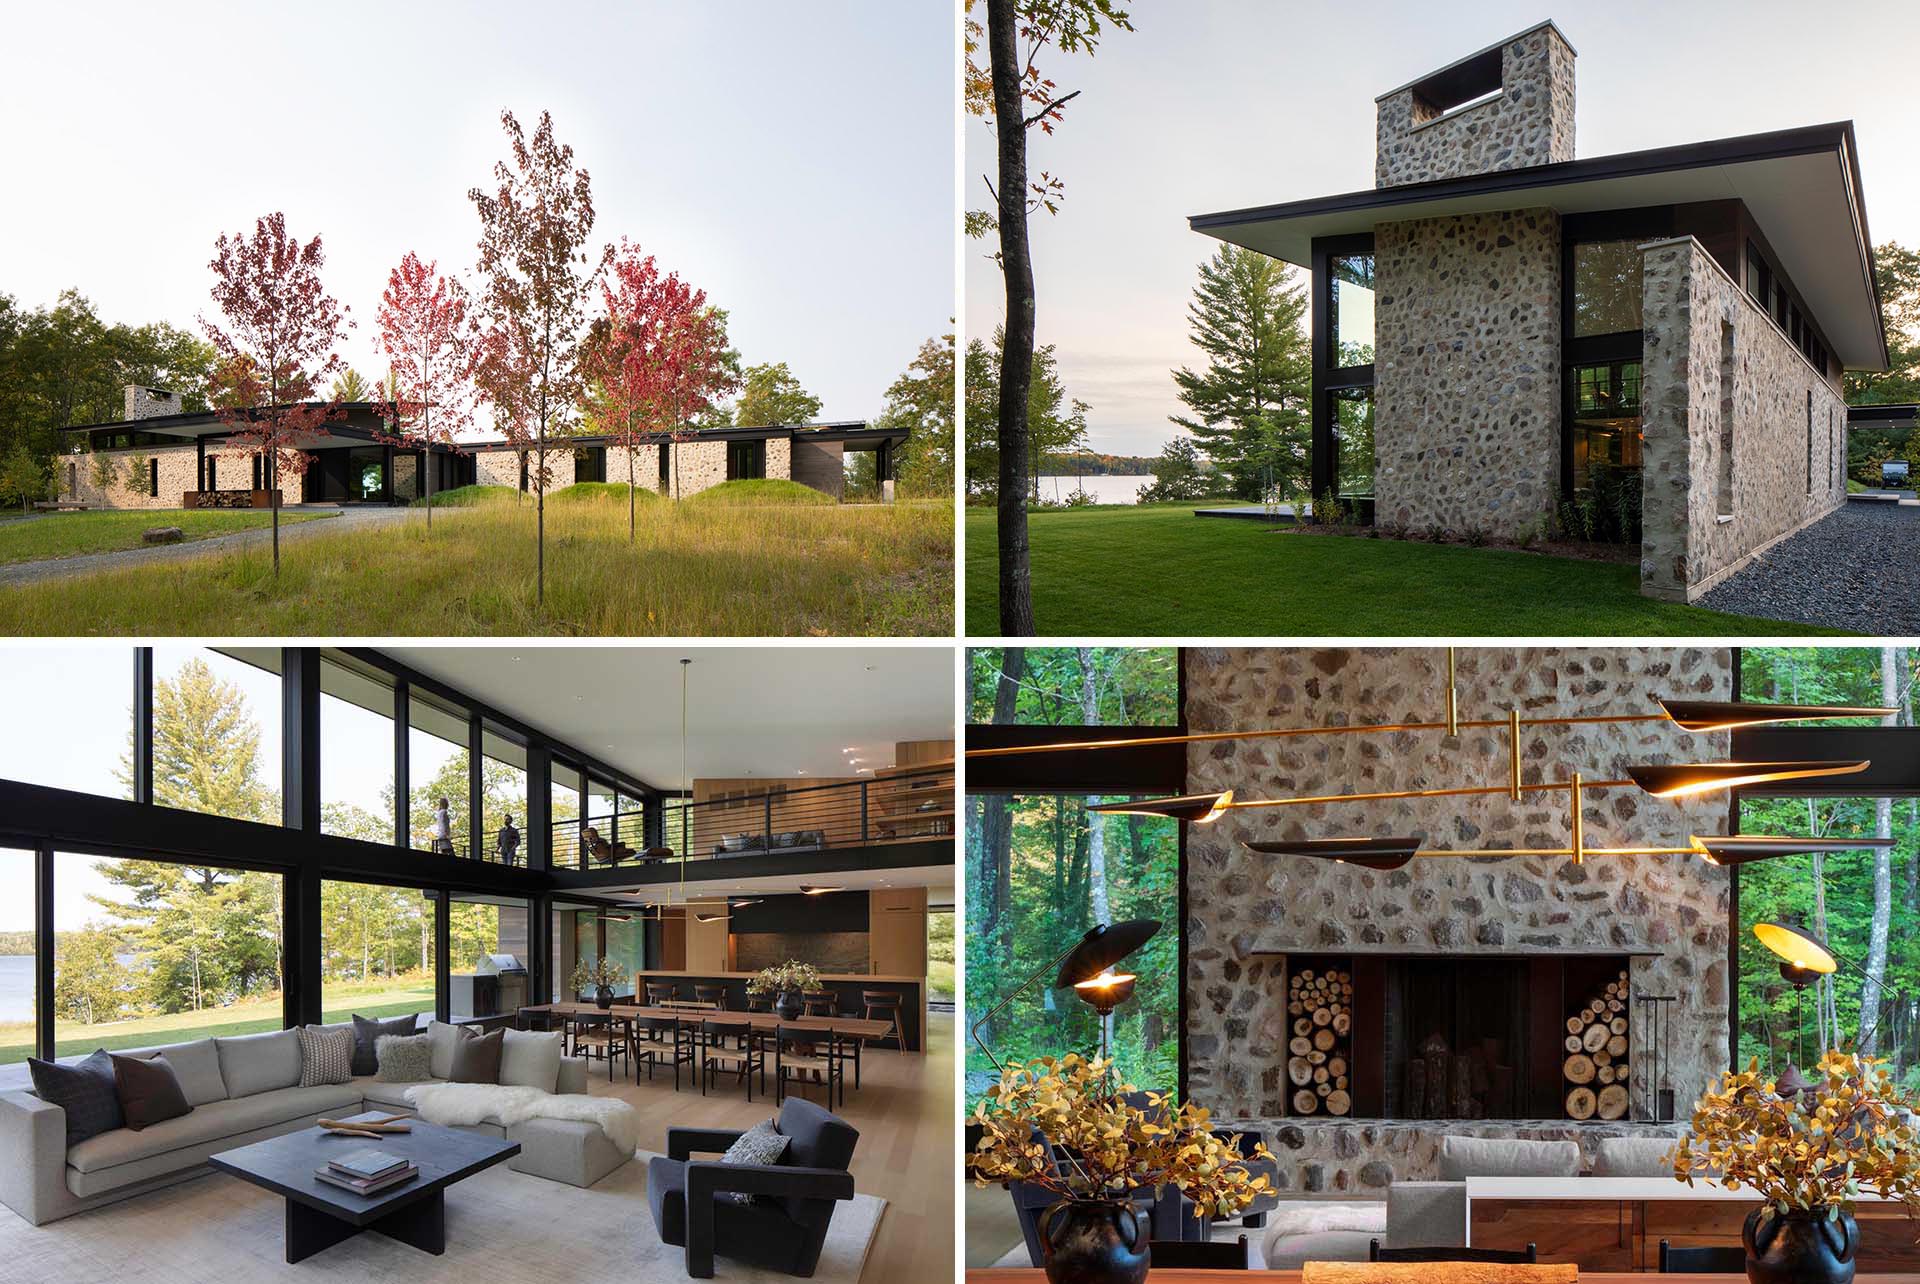 Vetter Architects has designed 'Camp Spirit Lake', a modern guest lodge that showcases rough-cut fieldstone and large windows that overlook a lake.